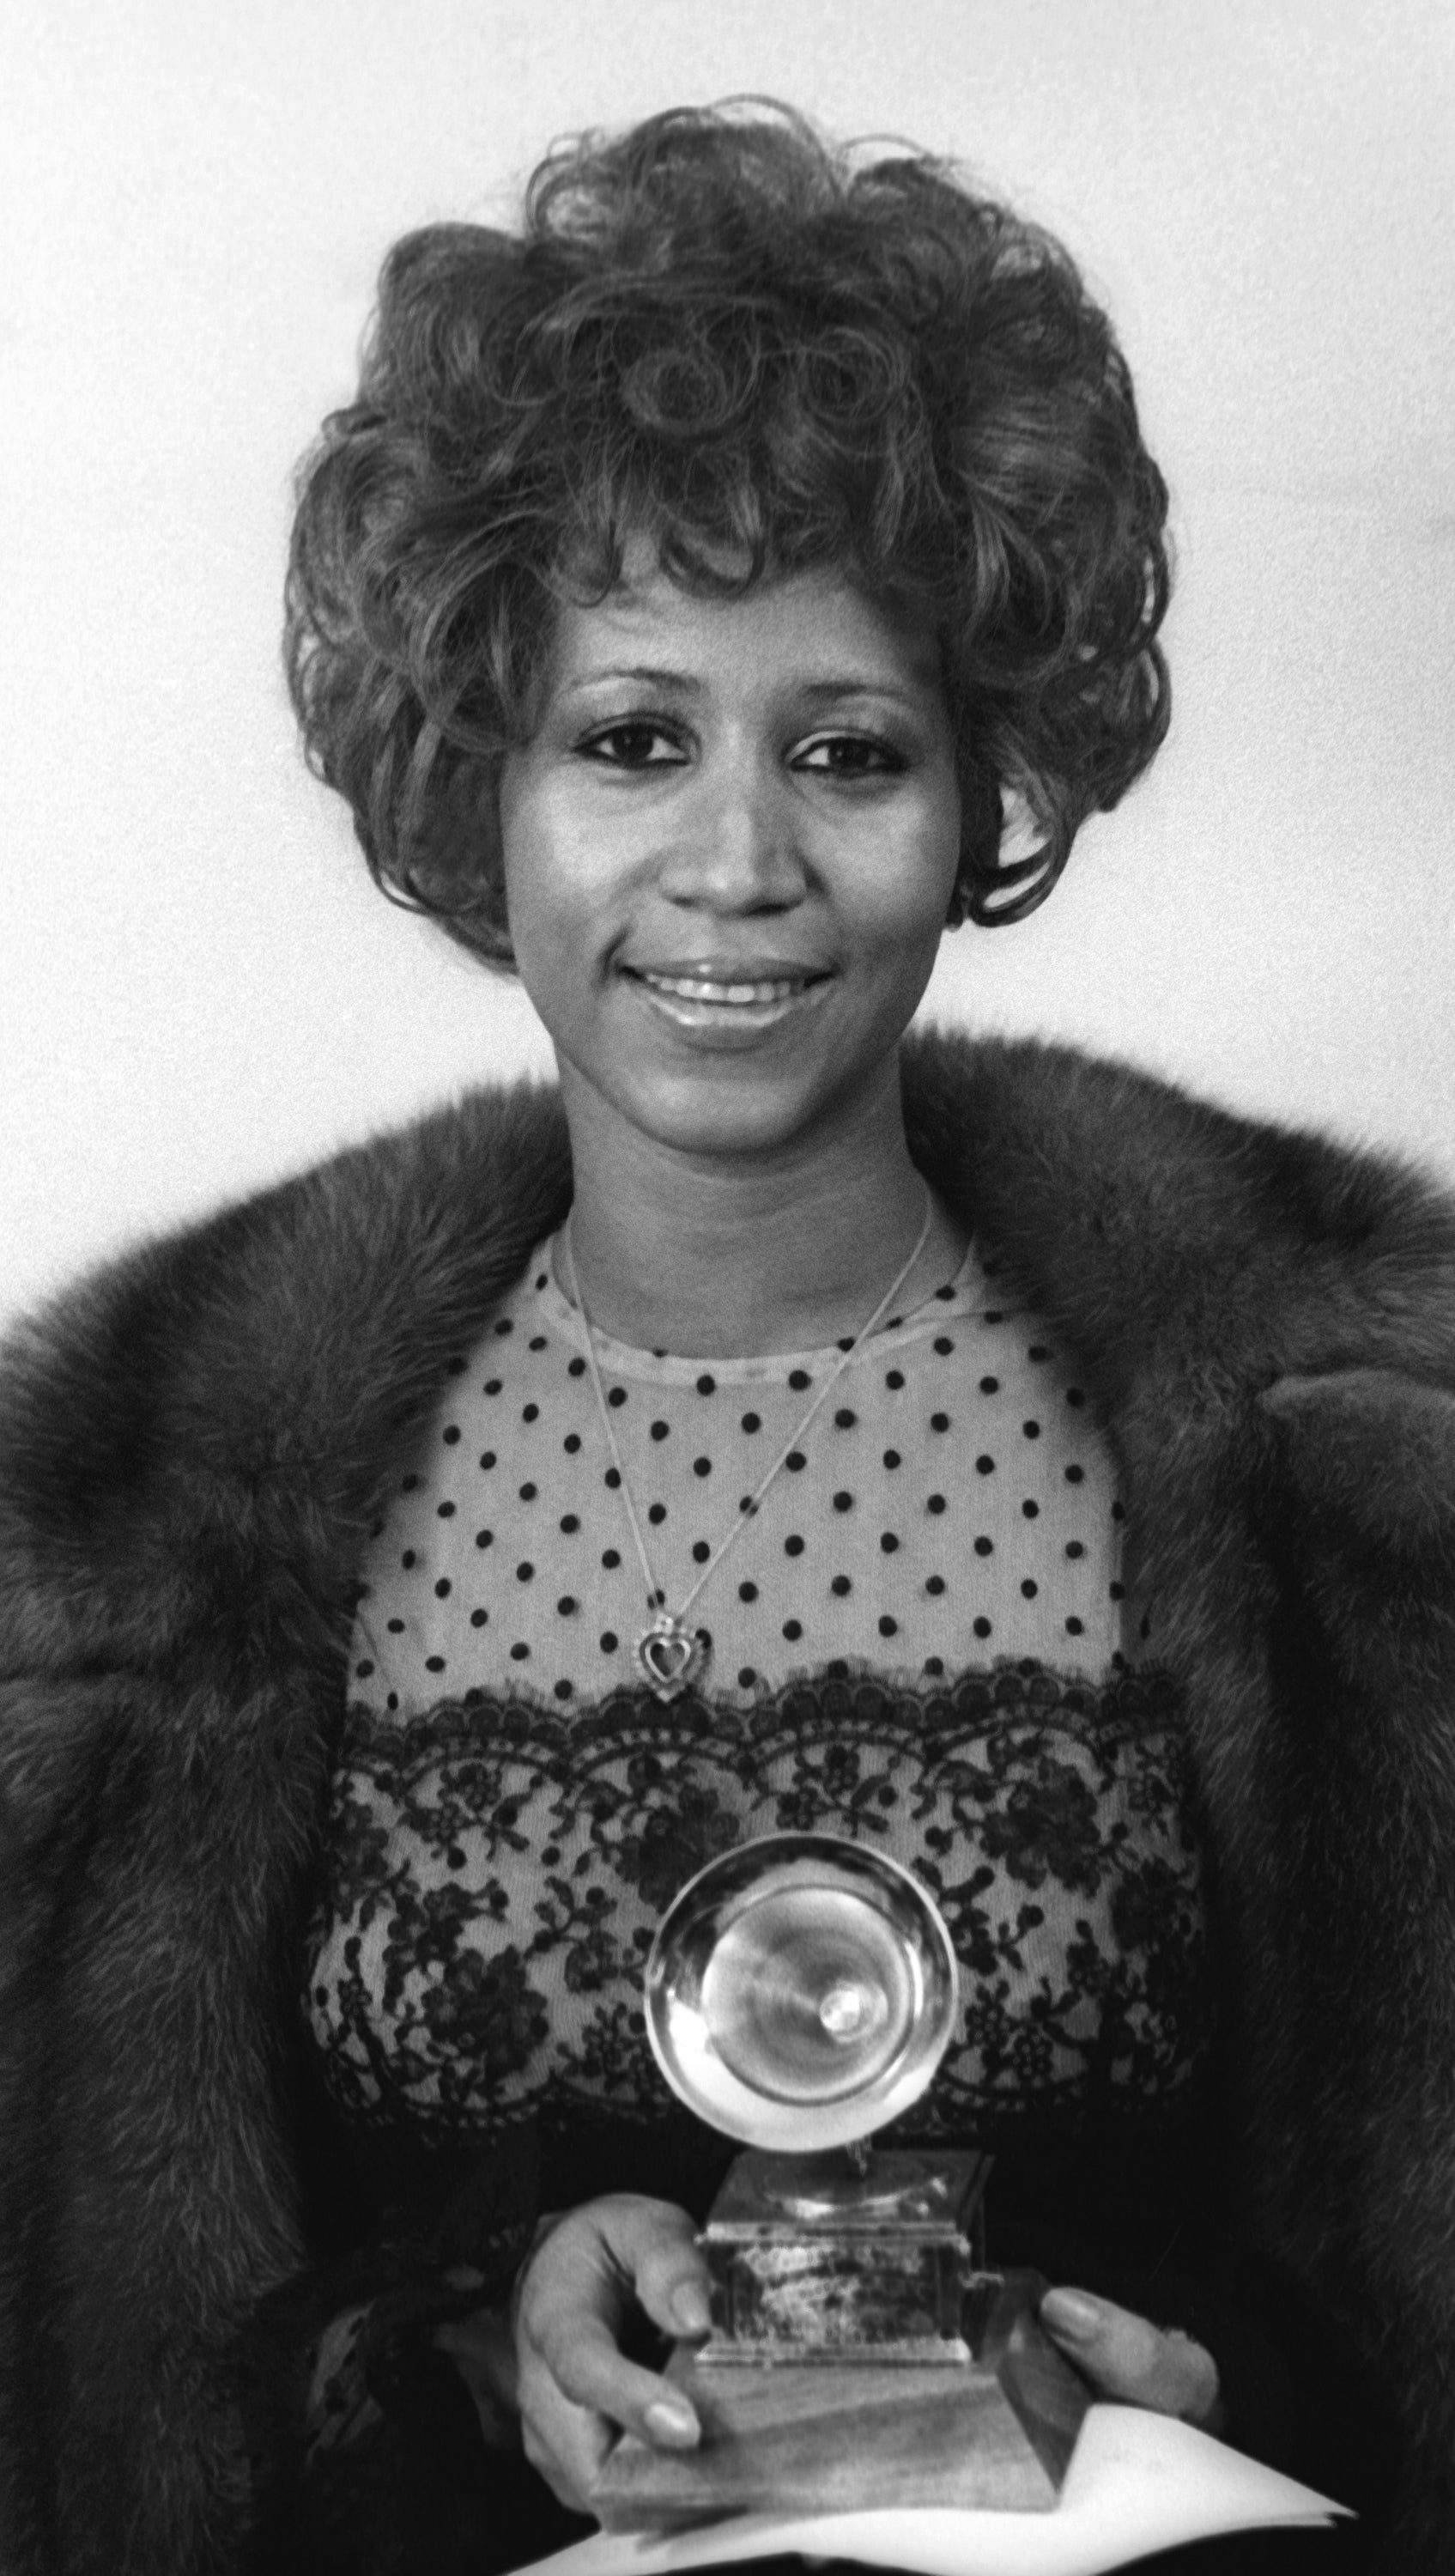 Remembering The Queen Of Soul: Aretha Franklin's Life Through The Years